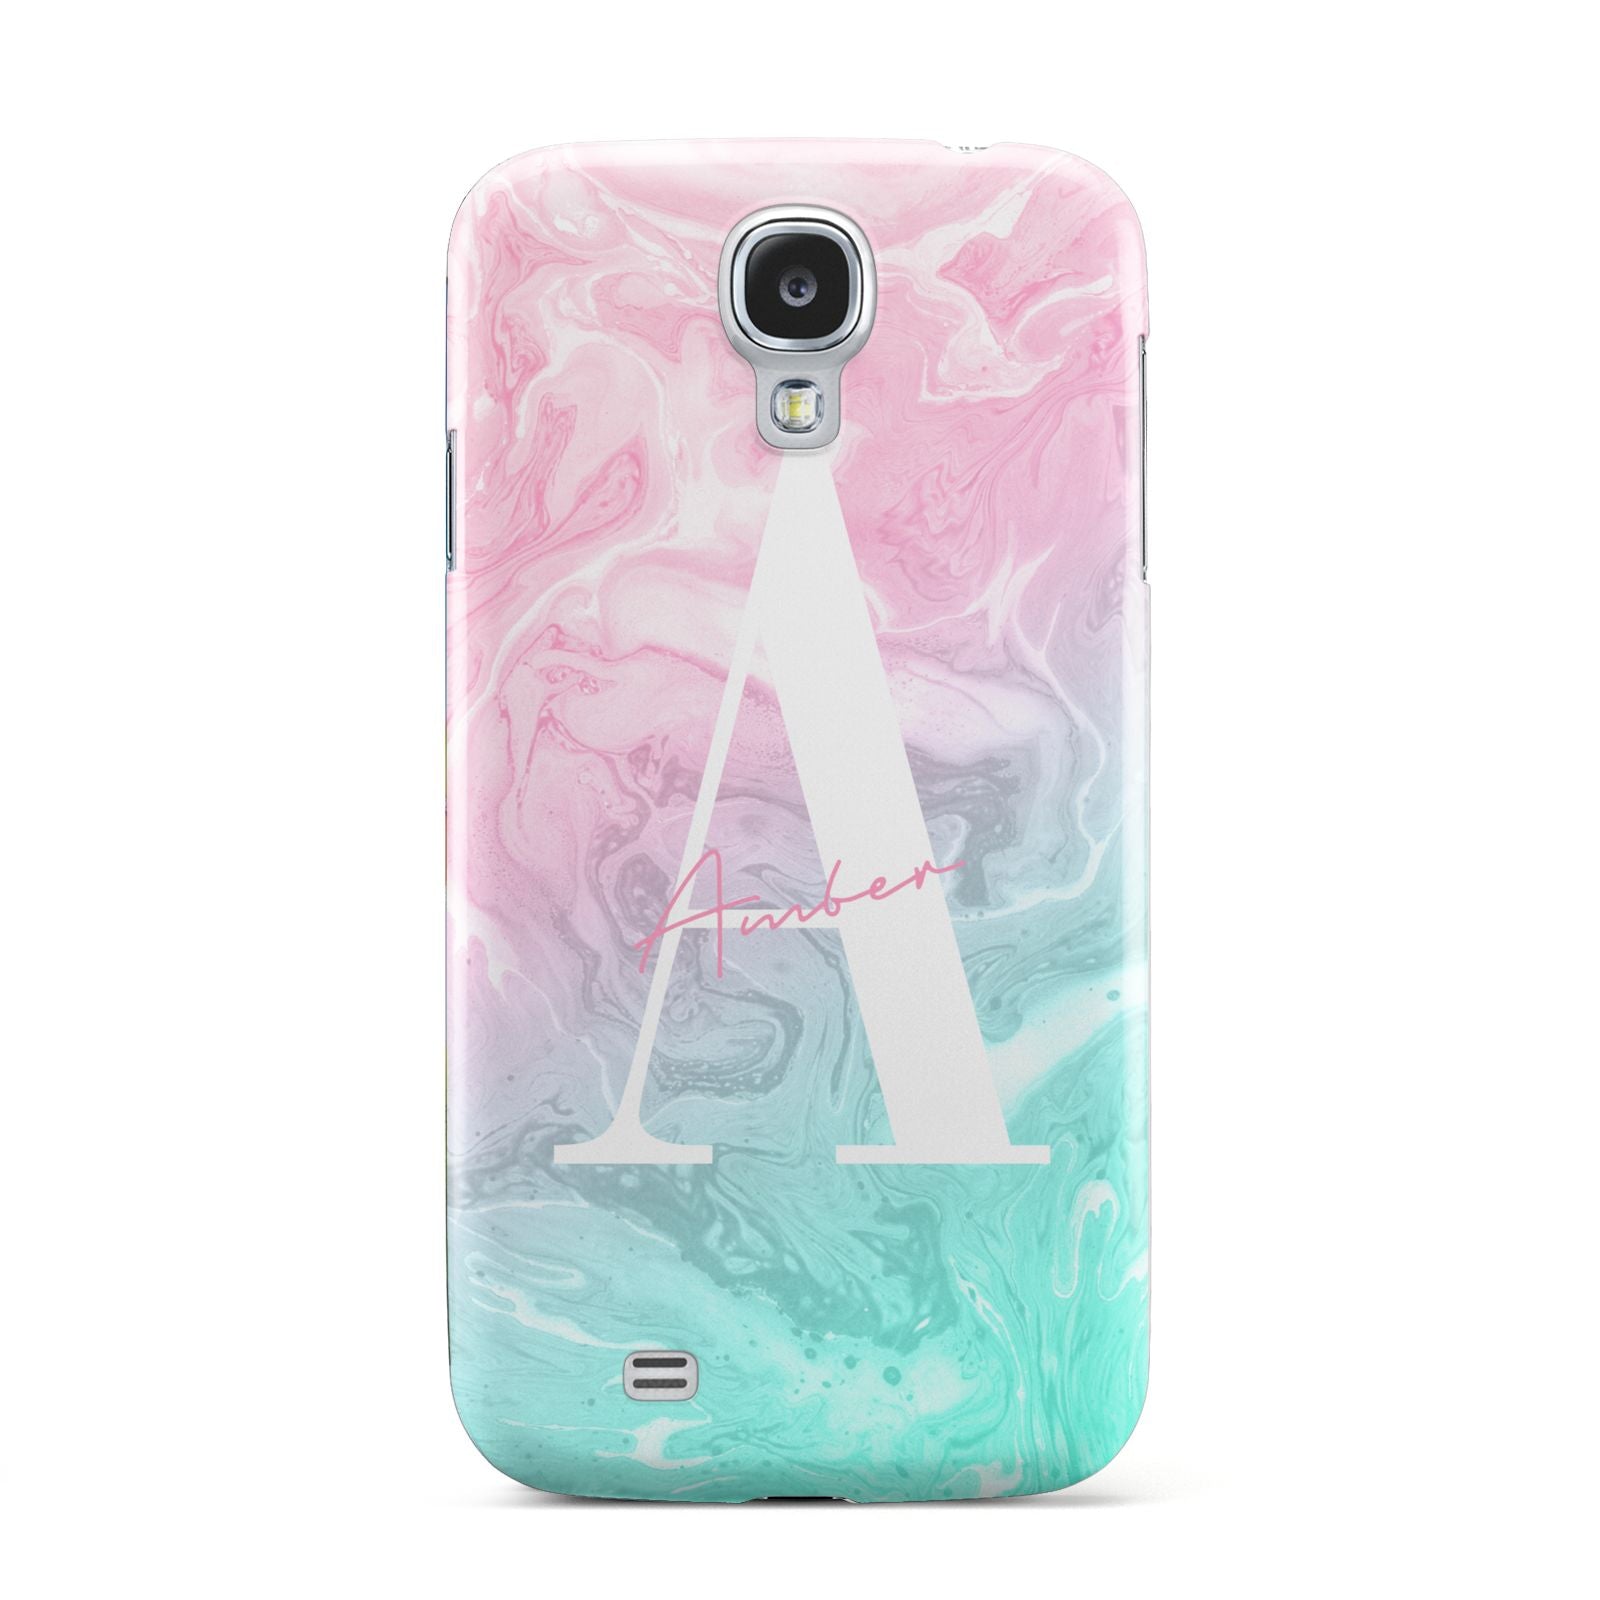 Monogrammed Pink Turquoise Pastel Marble Samsung Galaxy S4 Case